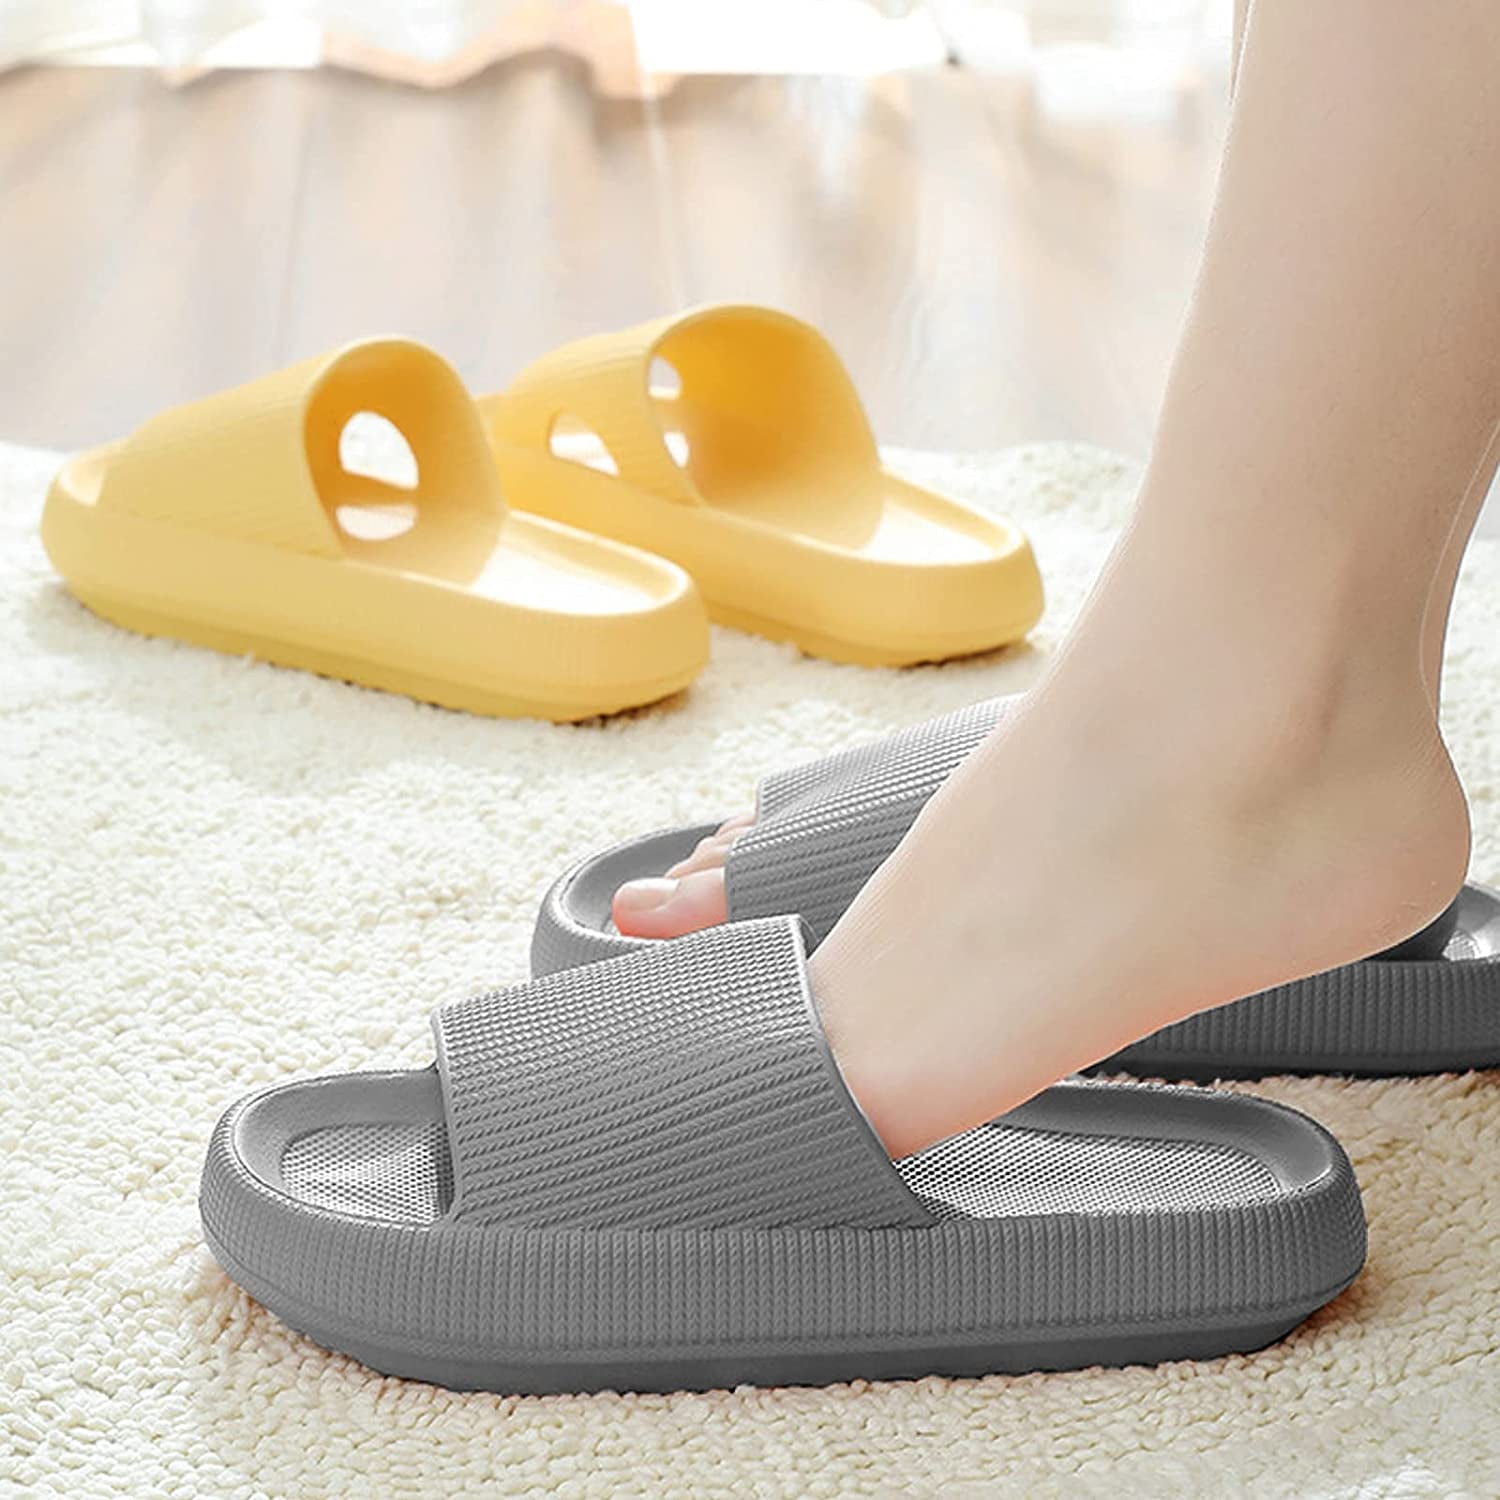 Unisex Non-Slip Pillow Slides Super Soft Home Slippers Thick Sole Open Toe Quick Dry Shower Slippers Beach Shoes for Women and Men Women 5.5-11/ Men 5-10 